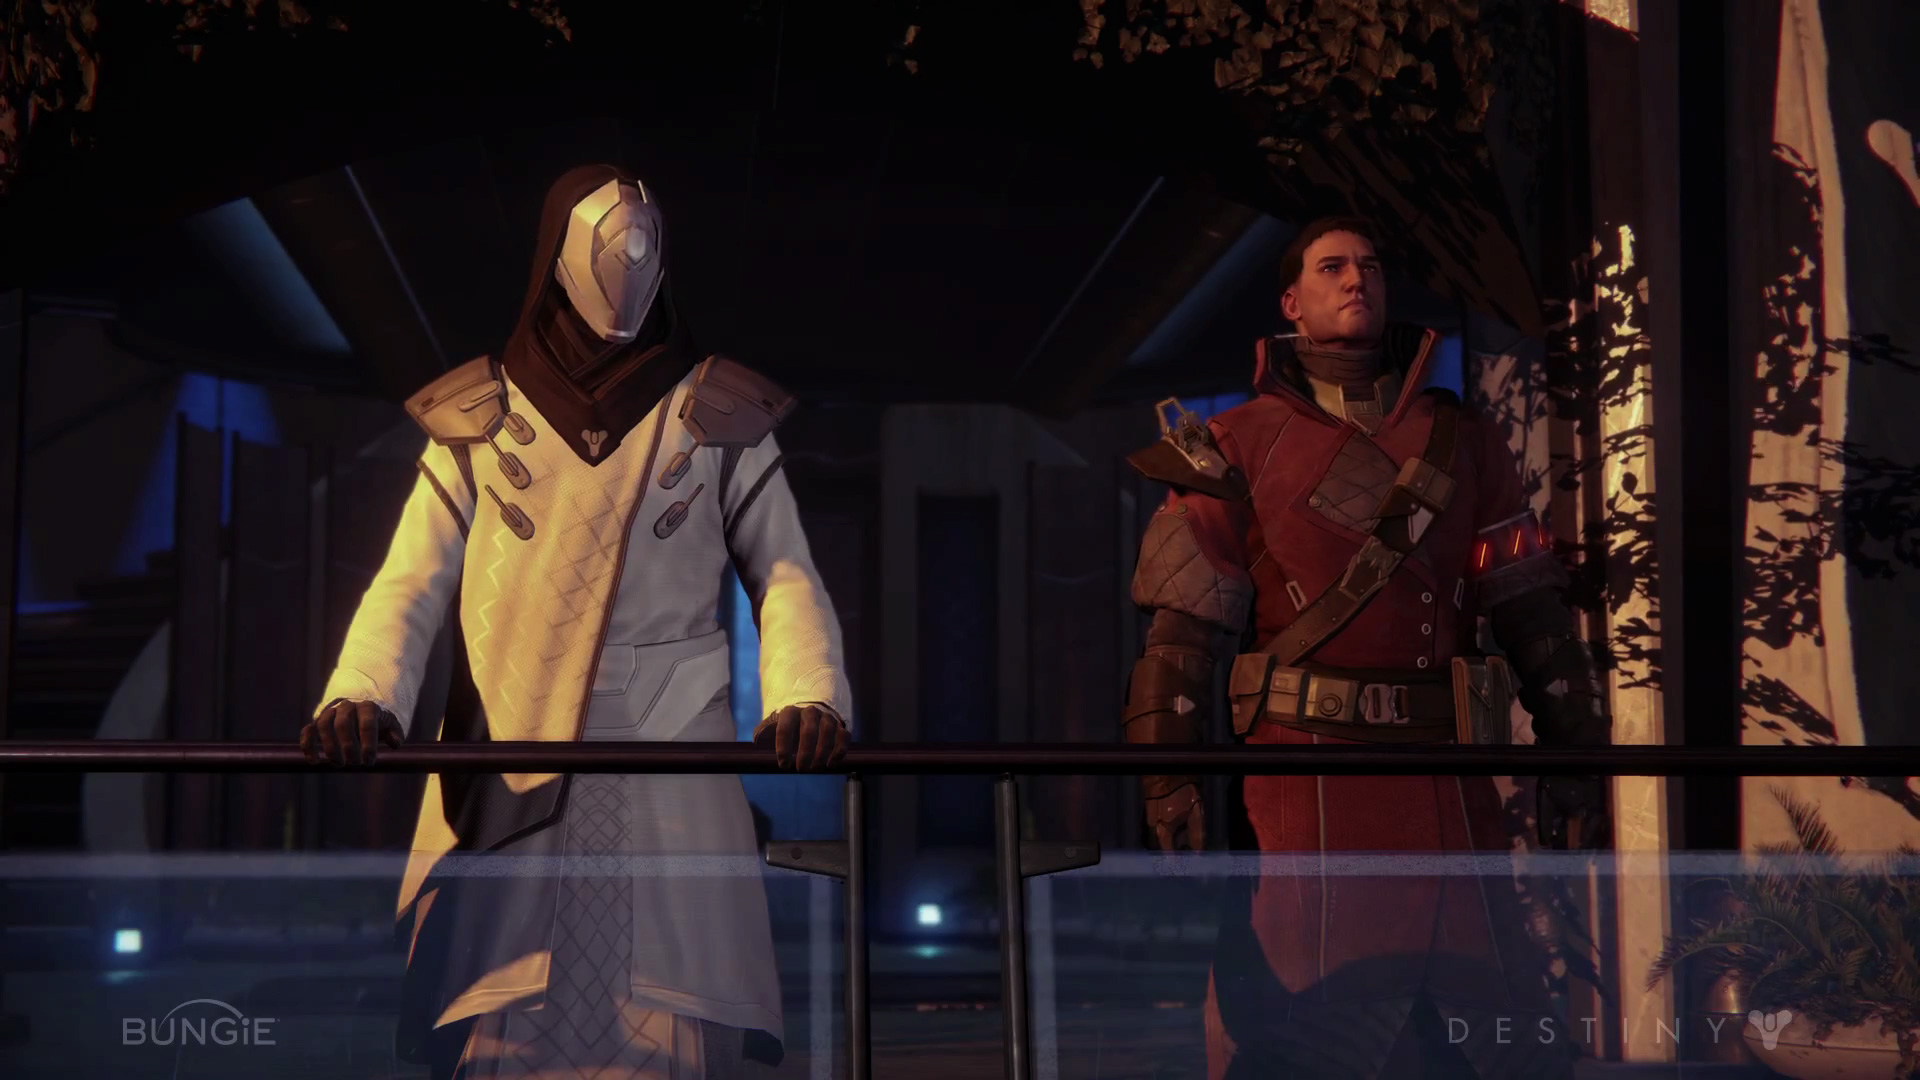 bungies-destiny-12-minutes-of-epic-gameplay-action-16.jpg